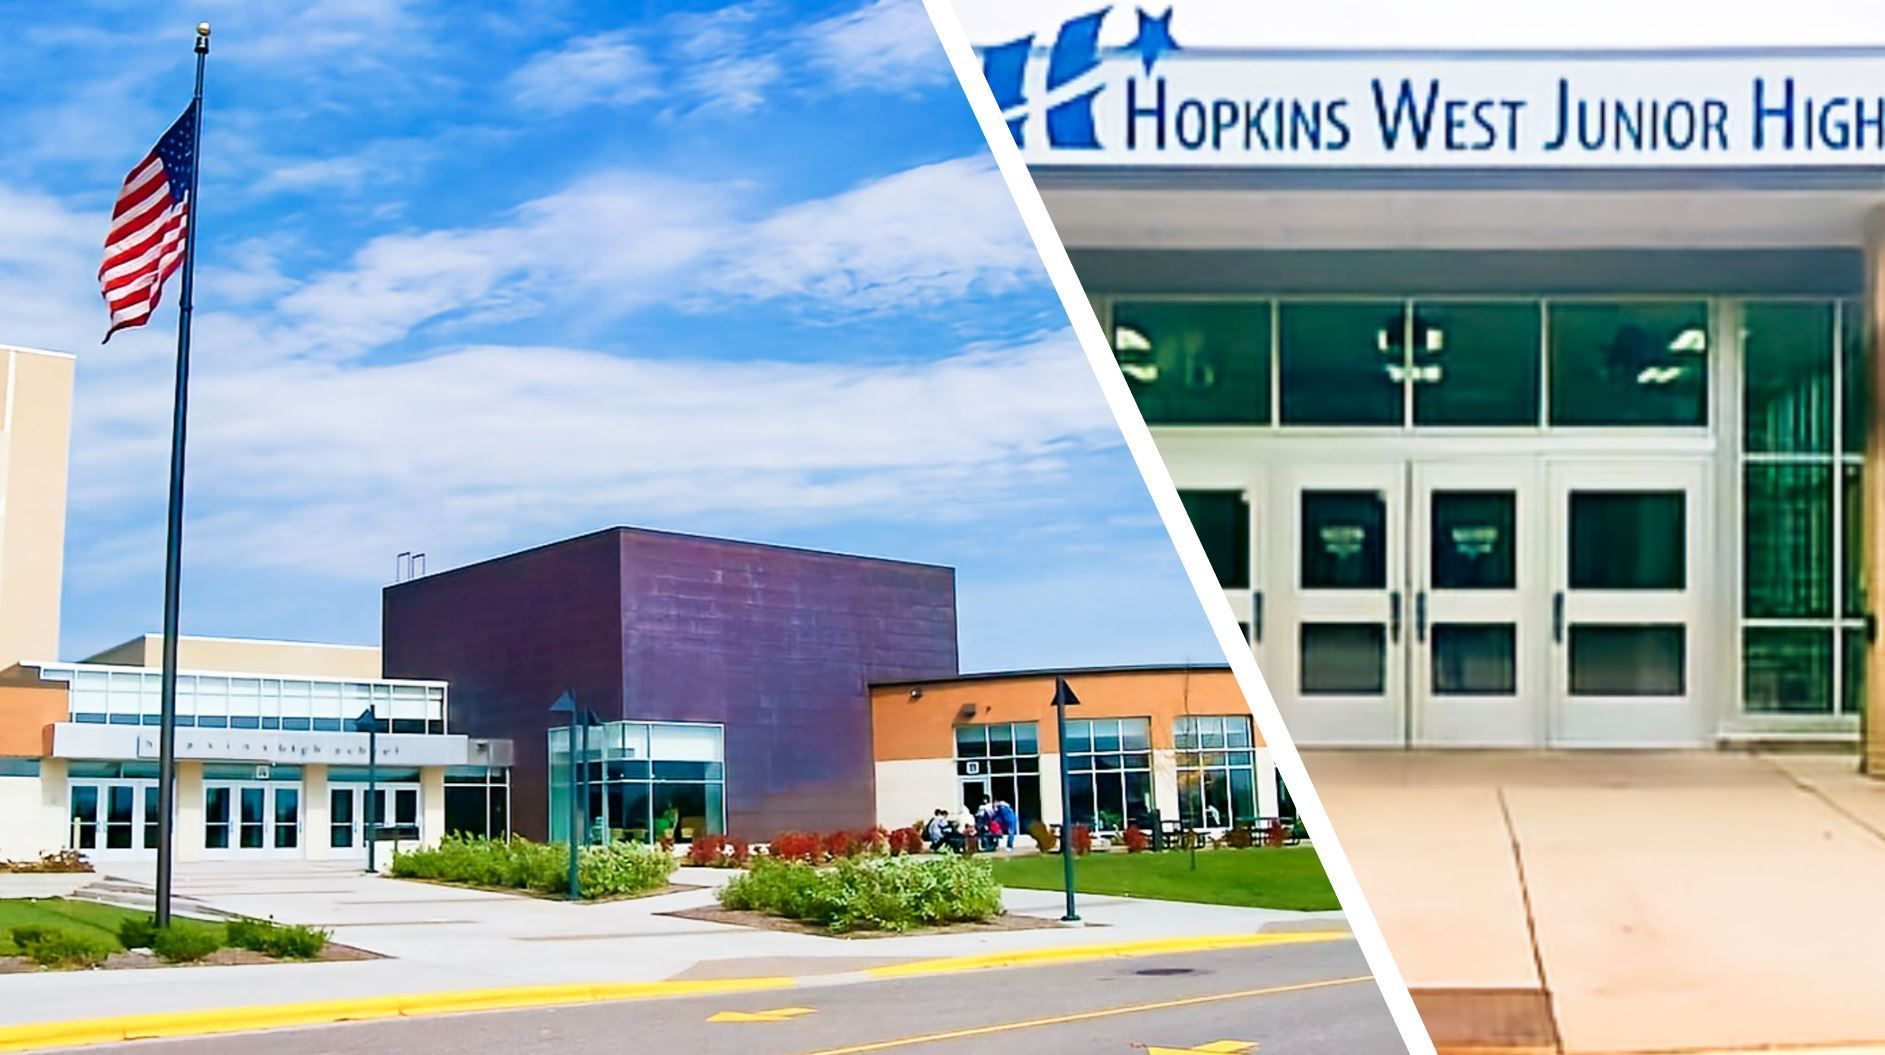 w l hall company Hopkins Senior High & West Junior High Schools Utilize ZONA & Modernfold Glass Walls for Collaborative, Safe and Flexible Learning Environments